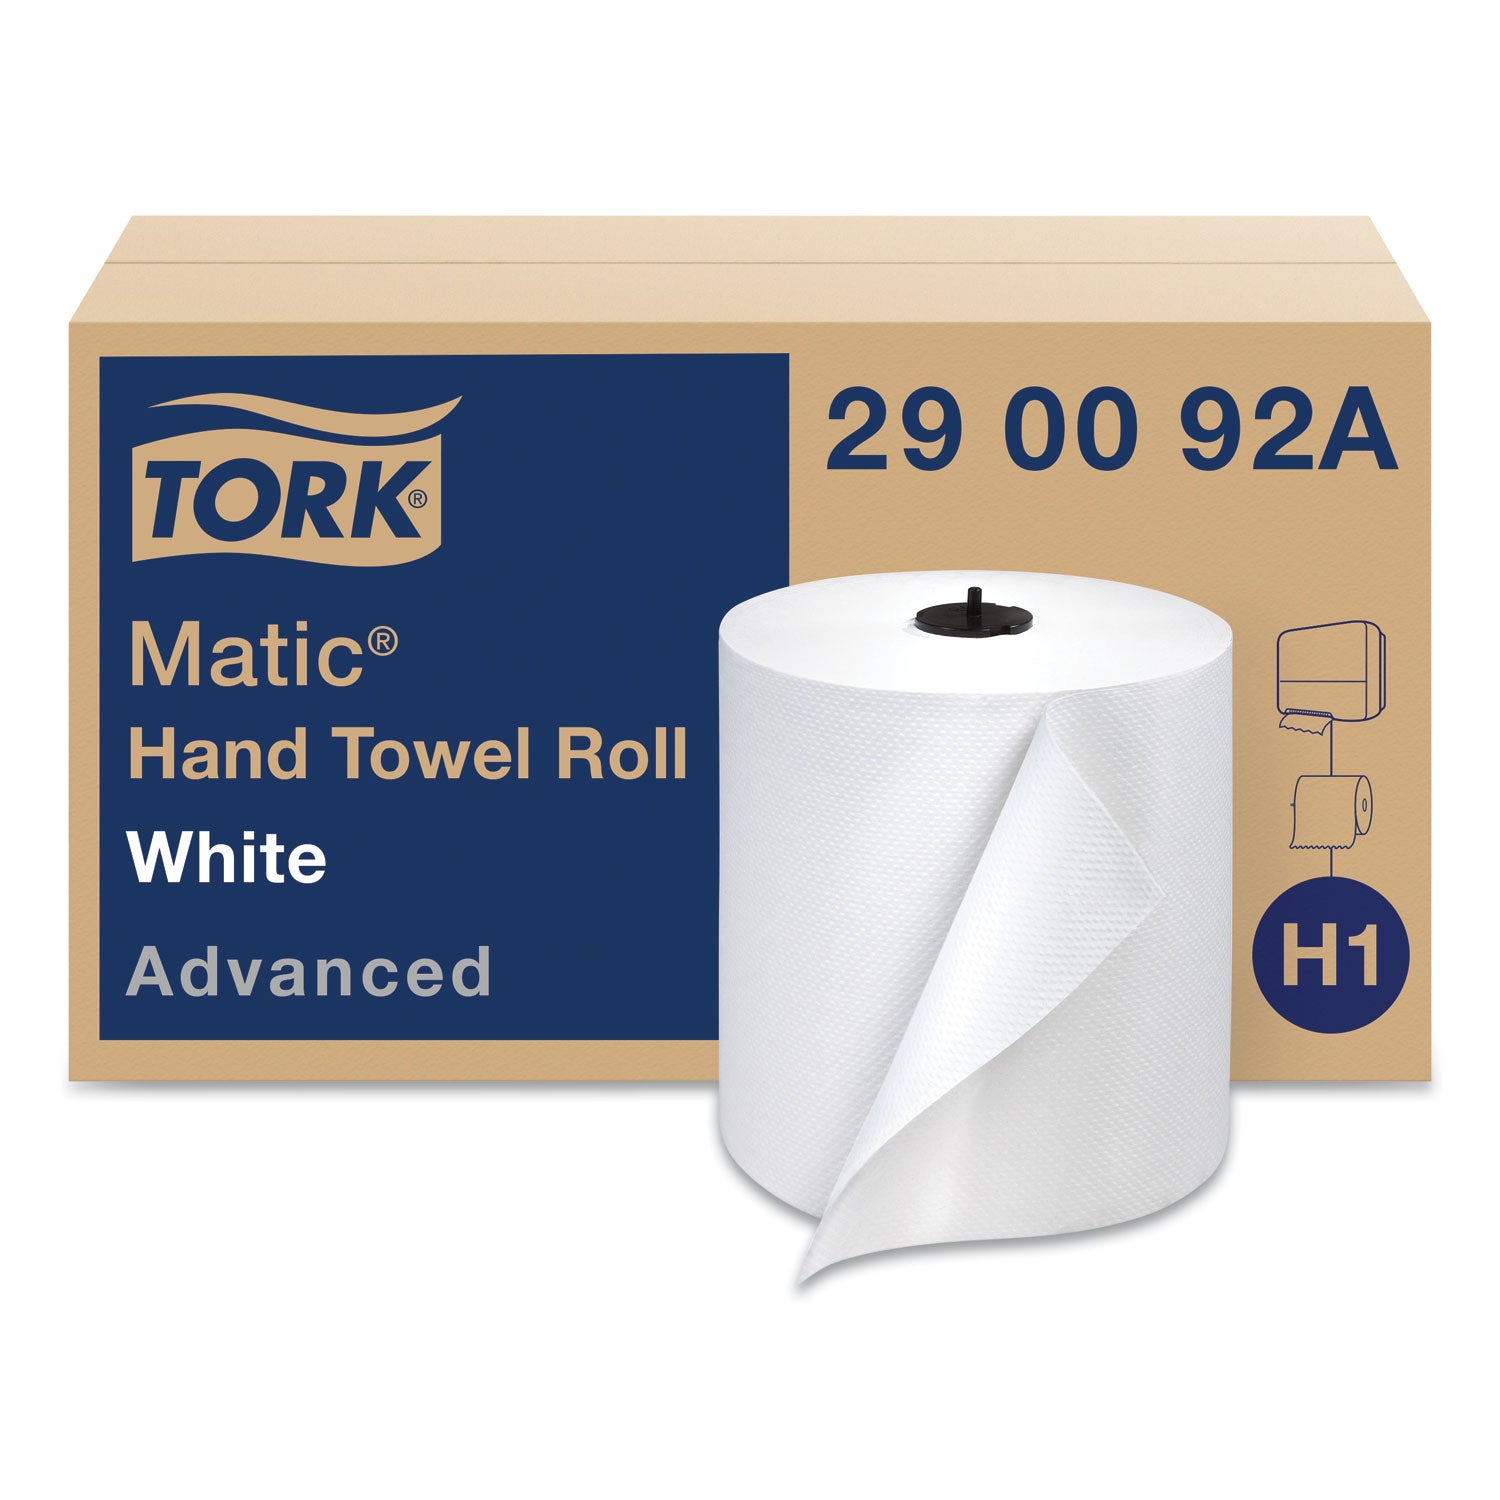 advanced-matic-hand-towel-roll-2-ply-77-x-525-ft-white-643-roll-6-rolls-carton_trk290092a - 2